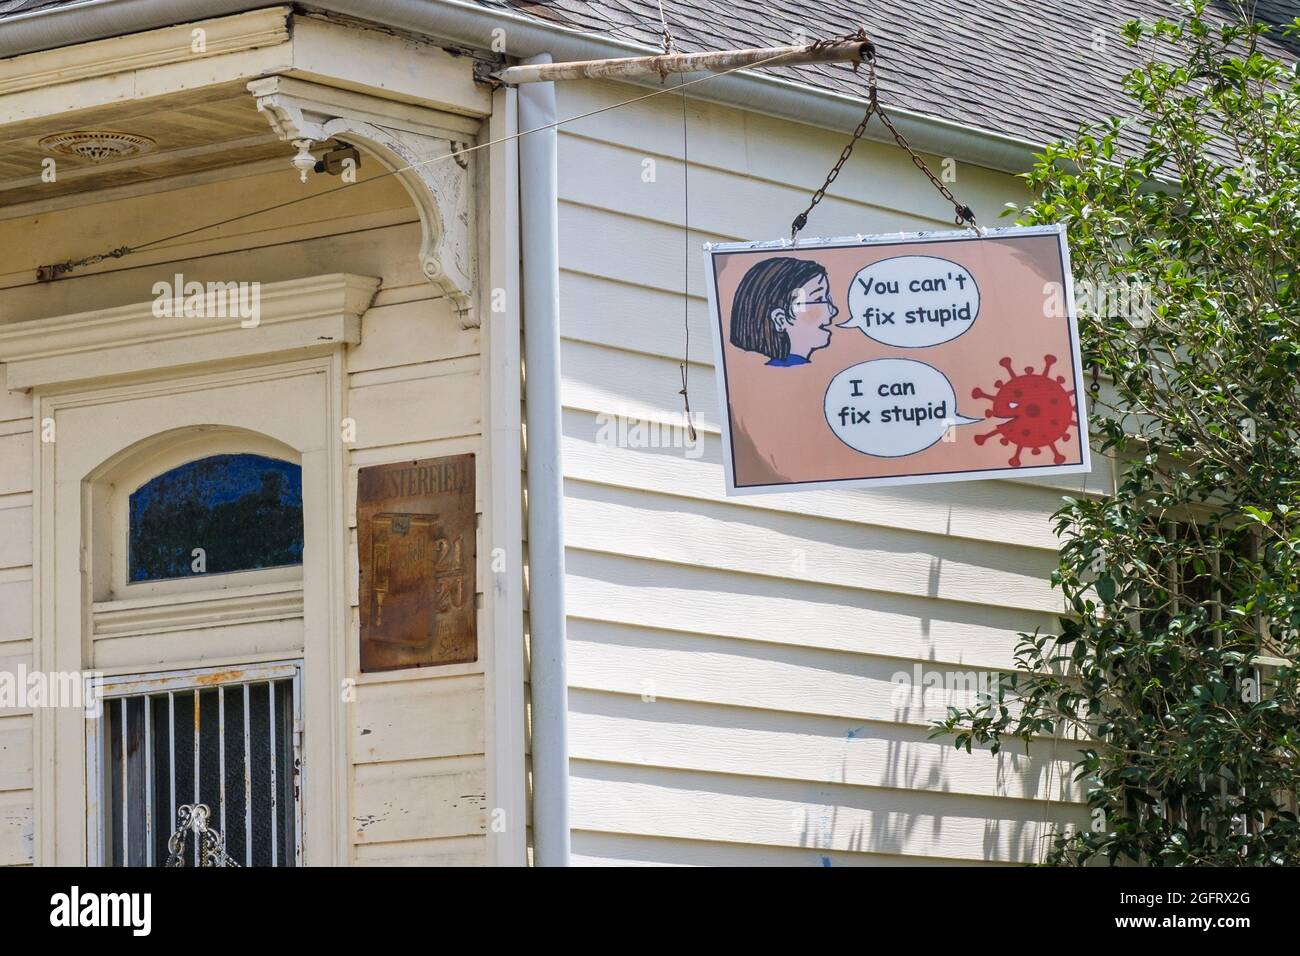 NEW ORLEANS, LA, USA - AUGUST 20, 2021: 'You Can't Fix Stupid' sign in Bywater Neighborhood Stock Photo